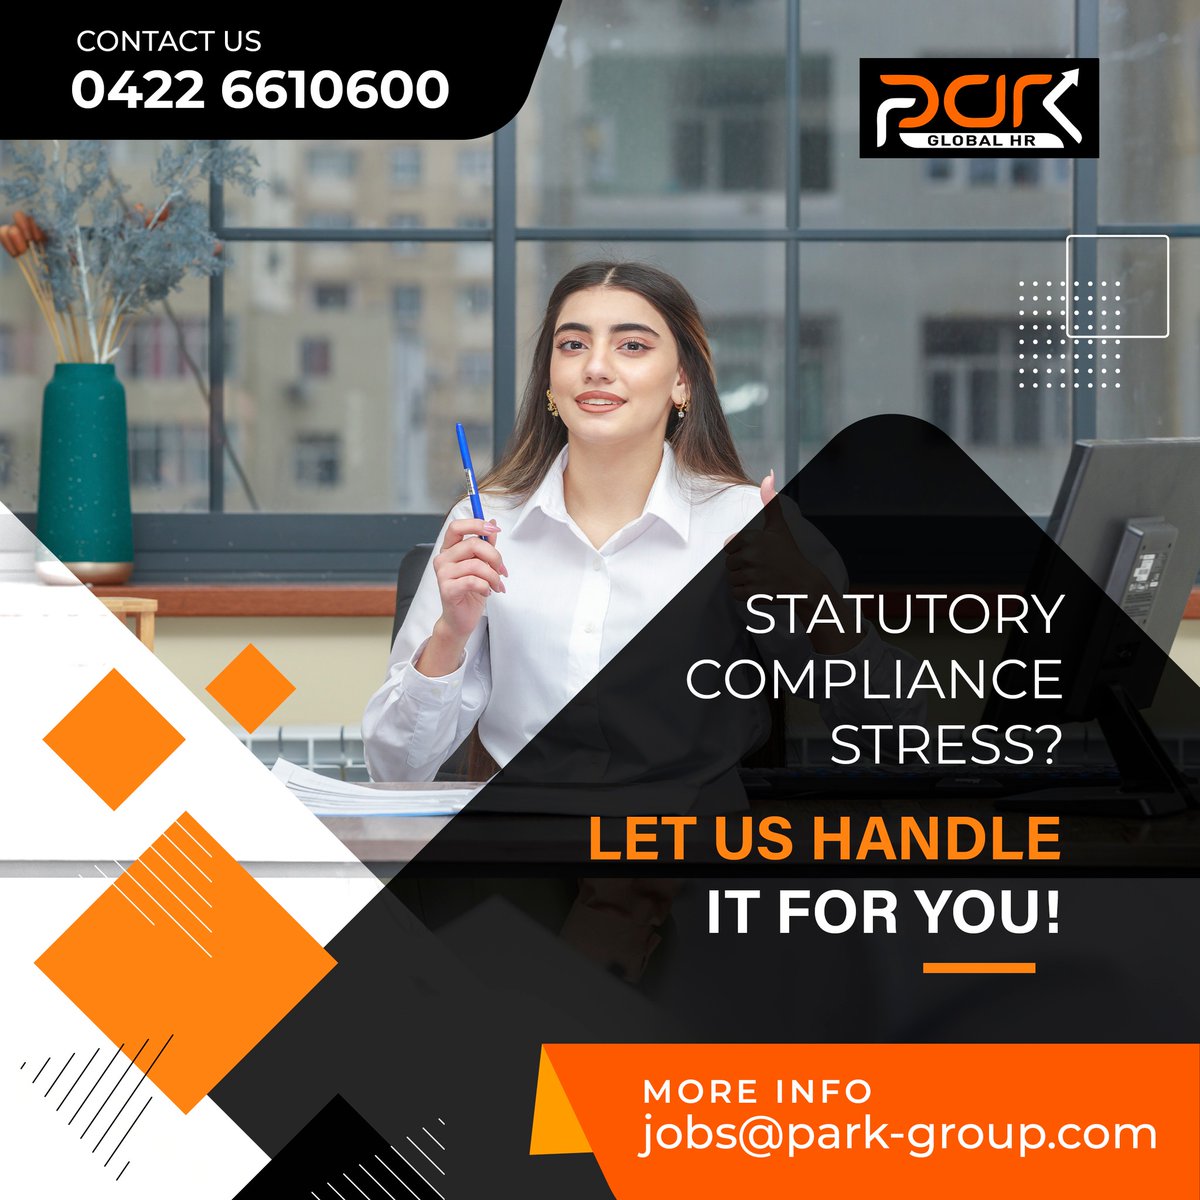 Let us take the burden off your shoulders and handle all your statutory compliance needs with ease. Focus on what you do best, and we'll ensure you stay on the right side of the law.

Say goodbye to compliance stress and hello to peace of mind!

#StatutoryCompliance